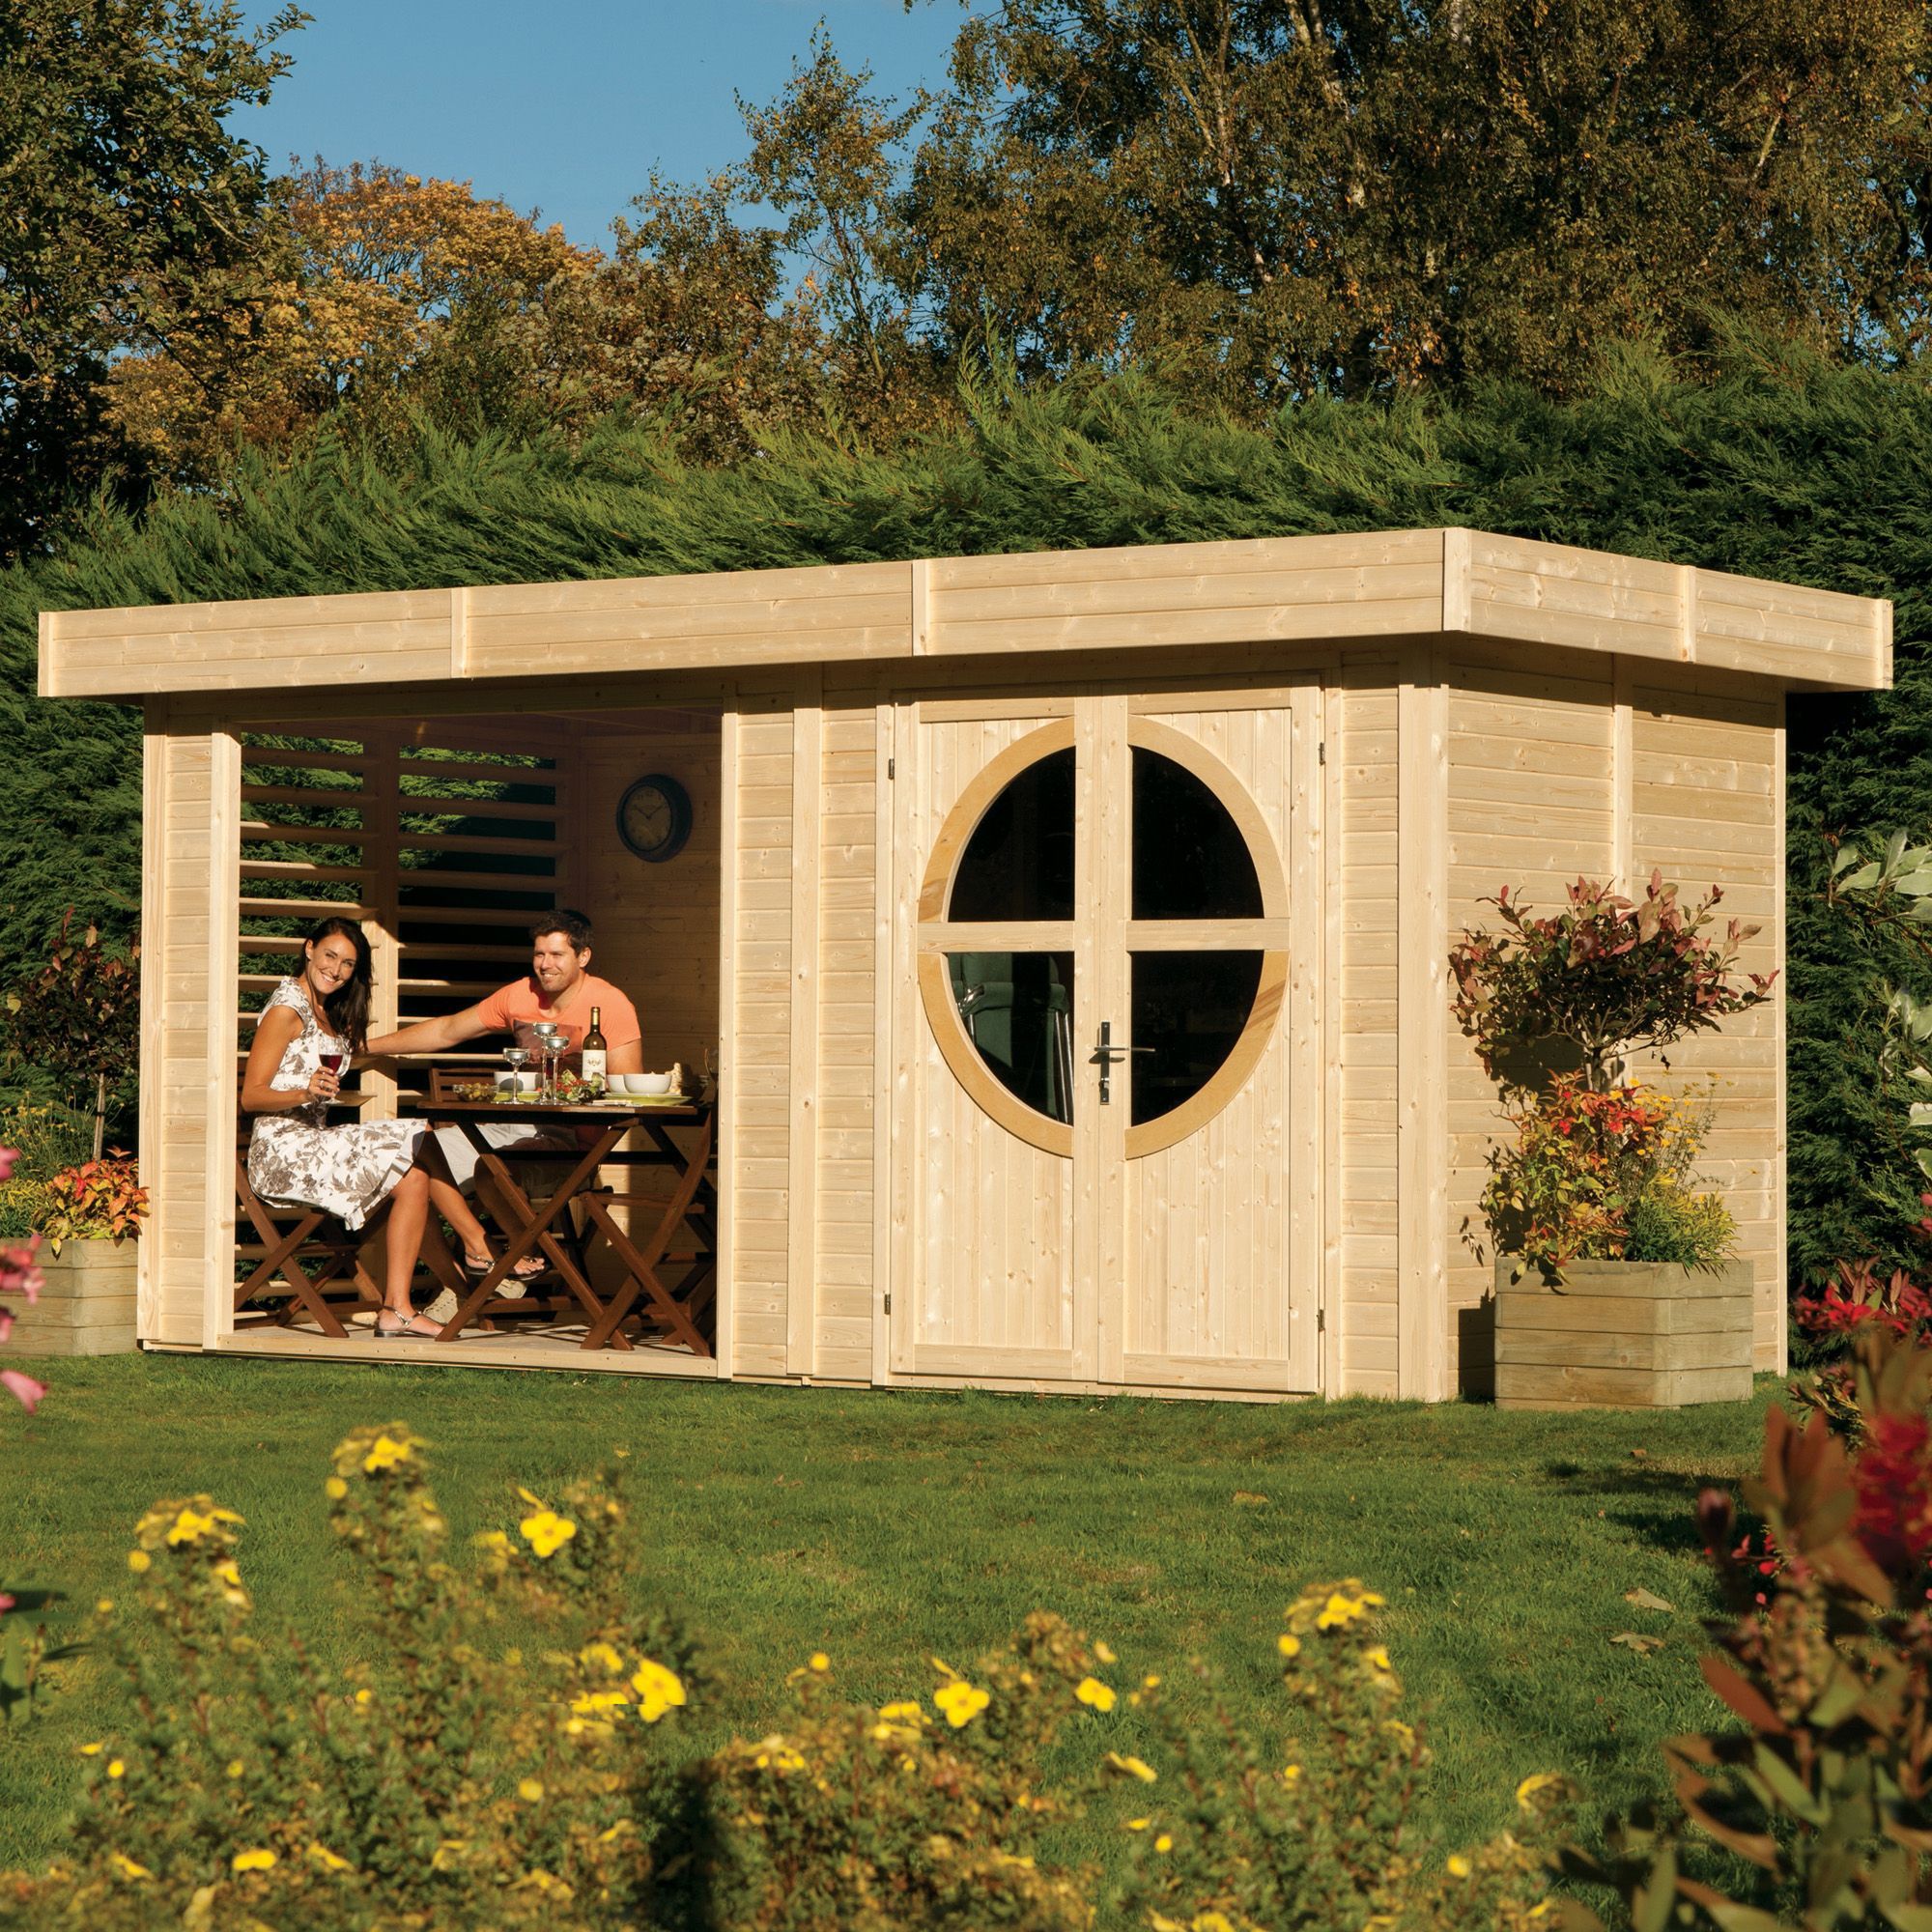 Rowlinson Connor 8x17 Toughened glass Pent Shiplap Wooden Summer house (Base included)